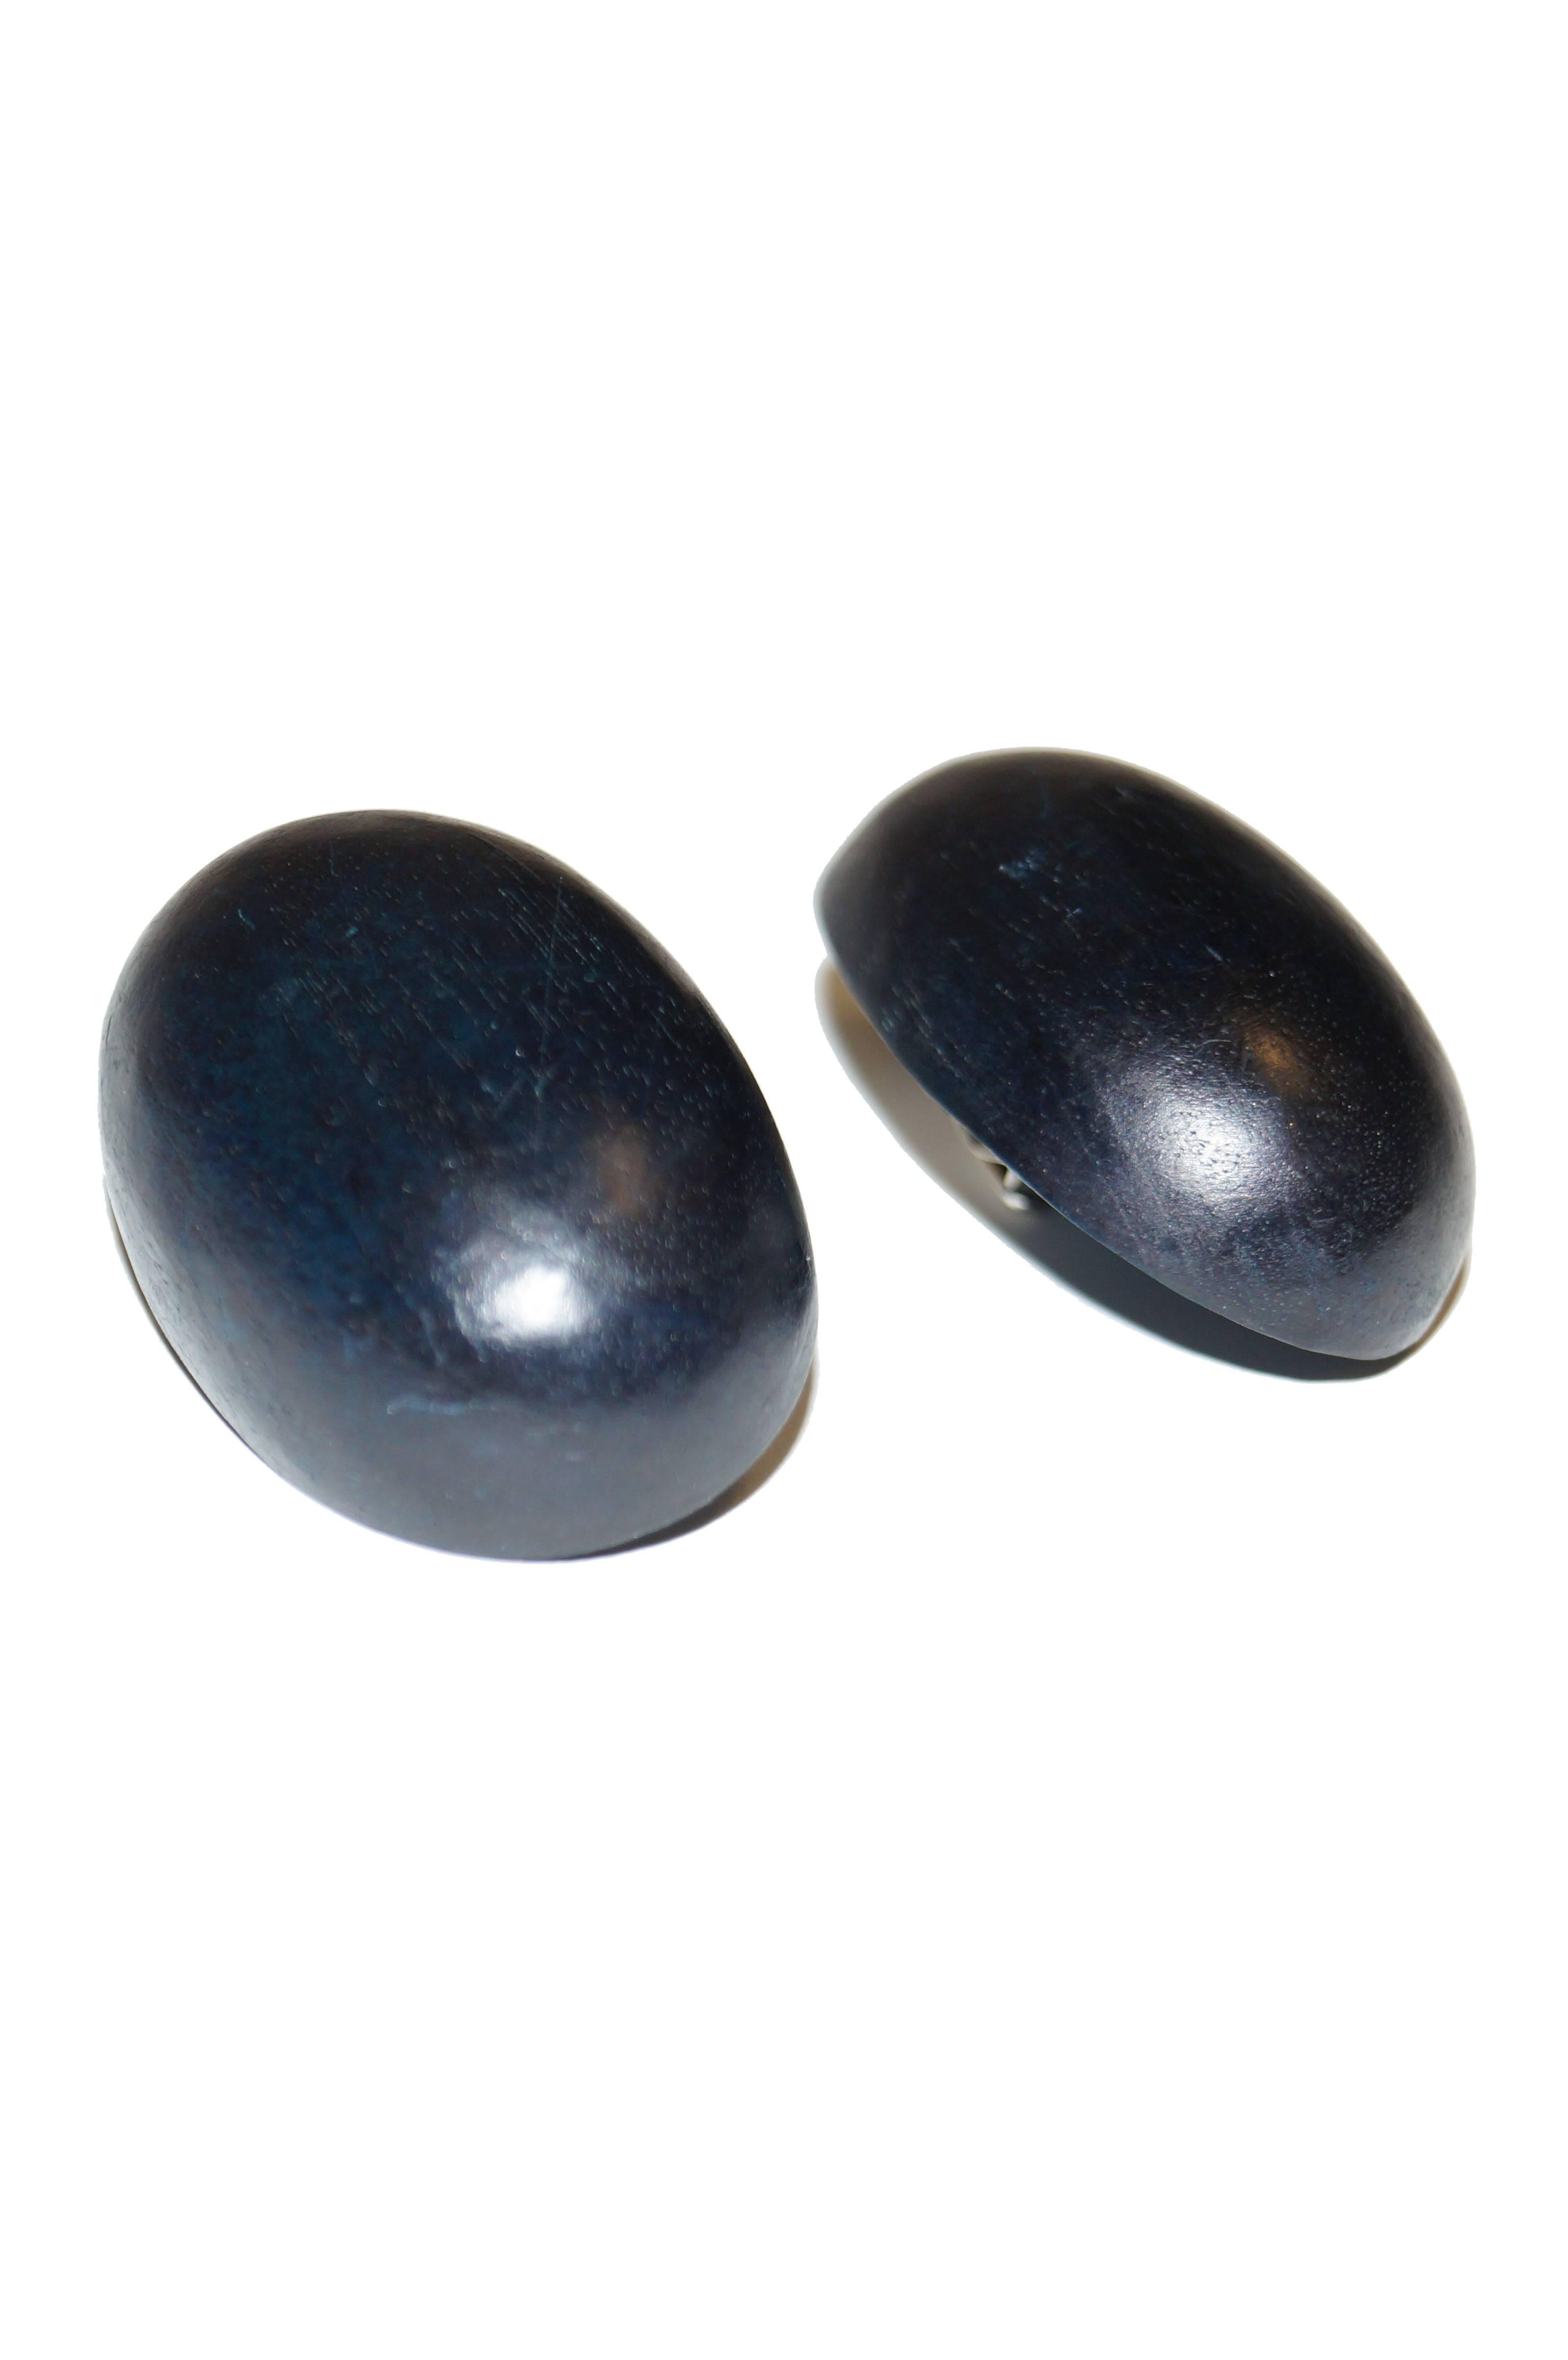 Oversized oval clip-back carved wood earrings by Monies! The earrings are large semi-ovals with a smooth black - blue shift finish. Flat backside. Monies label on tag on reverse.

Monies was founded in 1973, by Gerda (nee Gerda Lynggaard) and